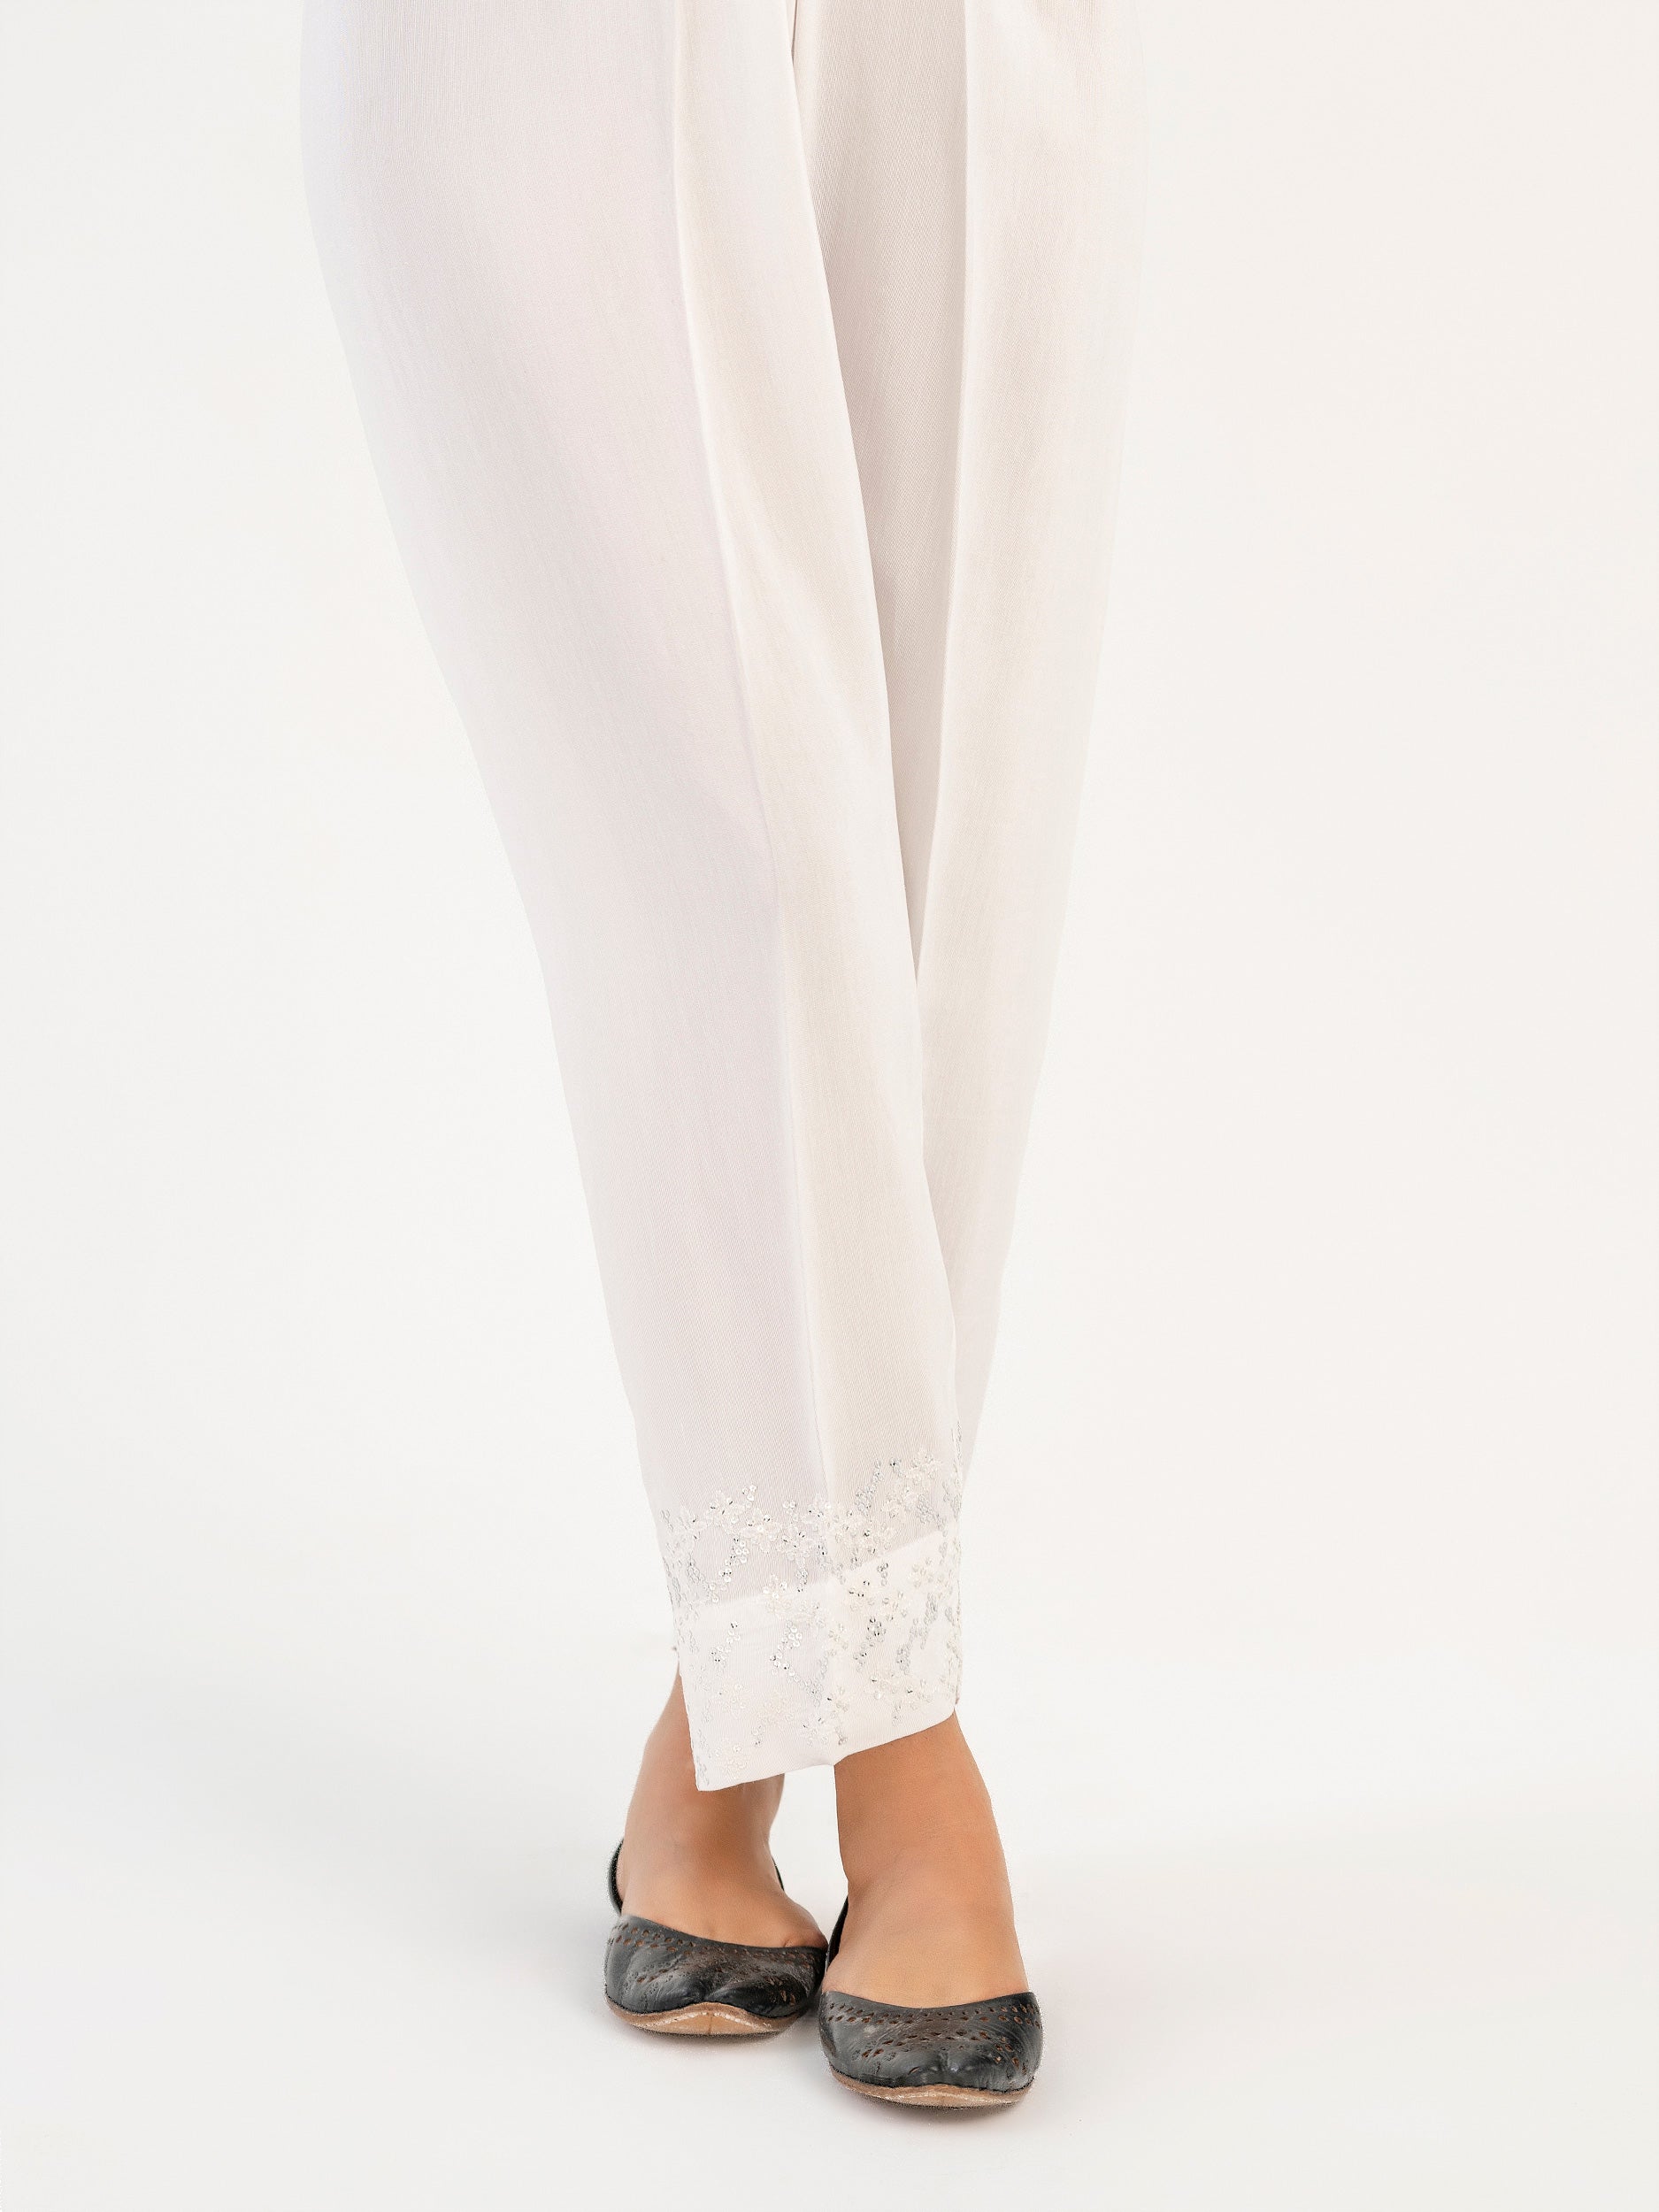 embroidered-raw-silk-trouser(pret)